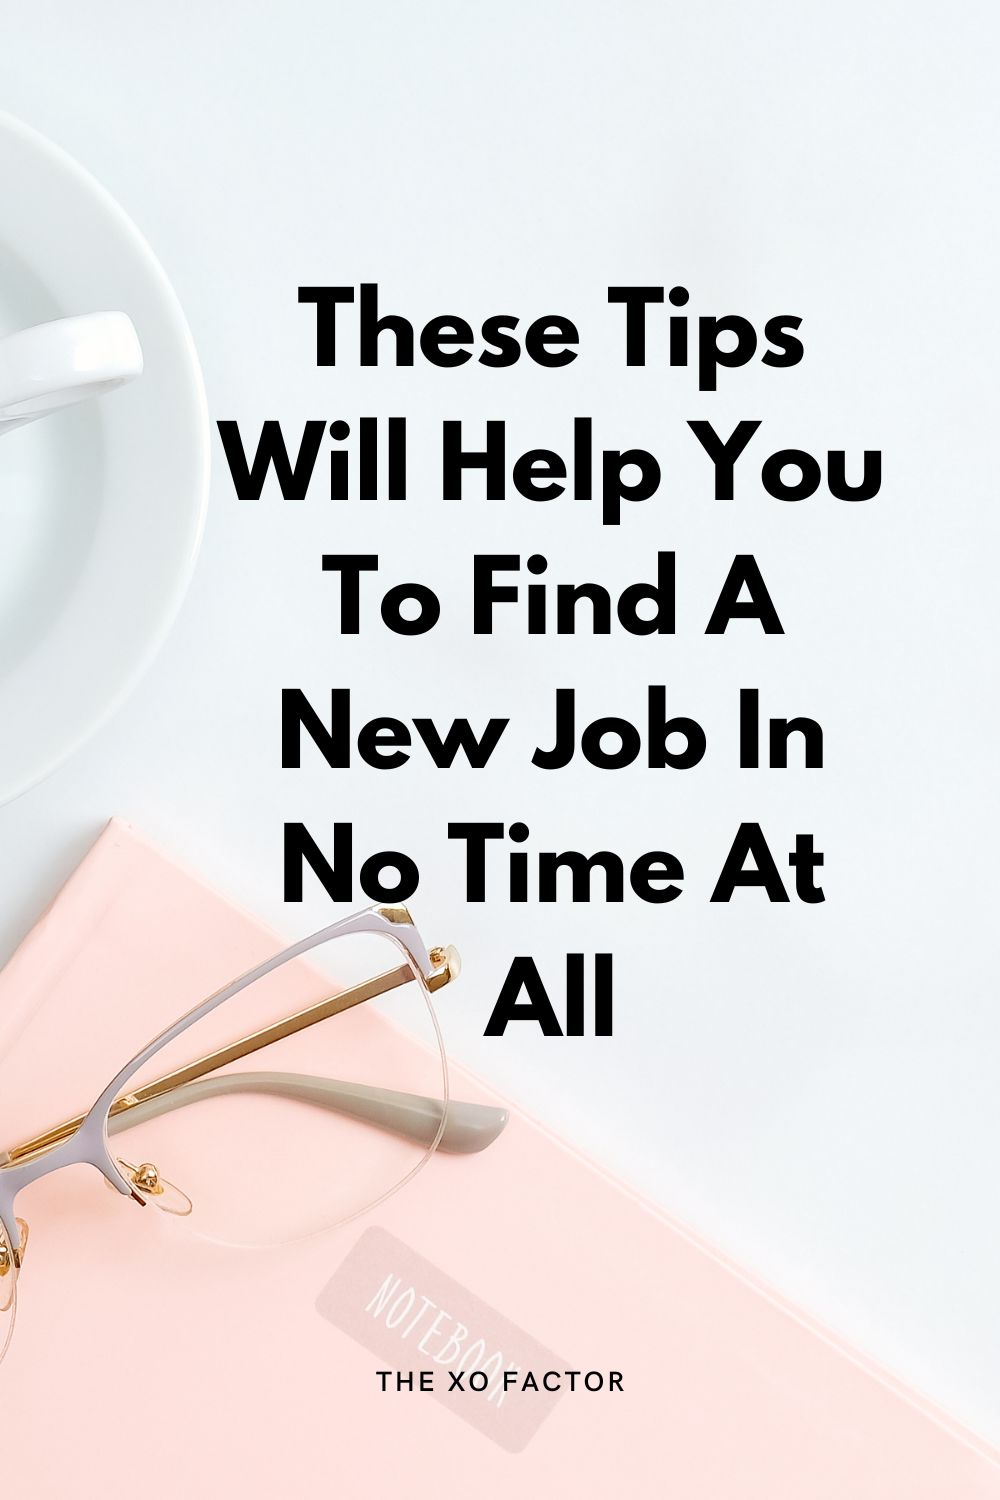 These Tips Will Help You To Find A New Job In No Time At All